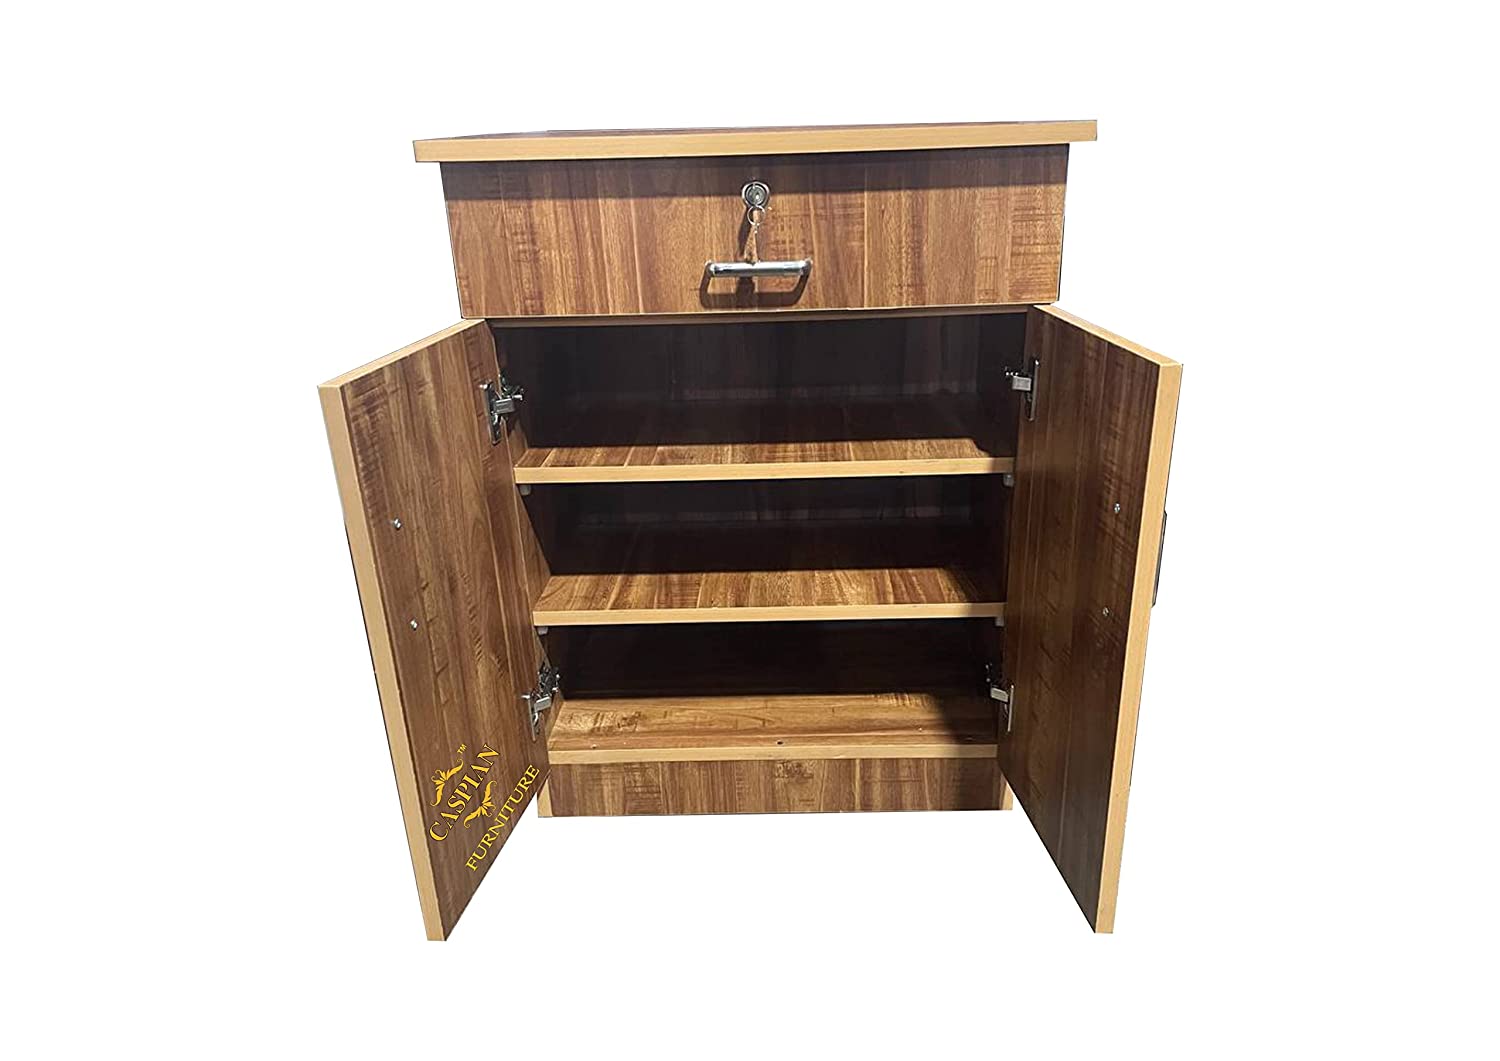 Engineered Wood 4 Tier Shelf in Mogany Finish| Shoe Cabinet | Hall Way Furniture | Outdoor Cabinet with Lock | Size 30 x 24 inches